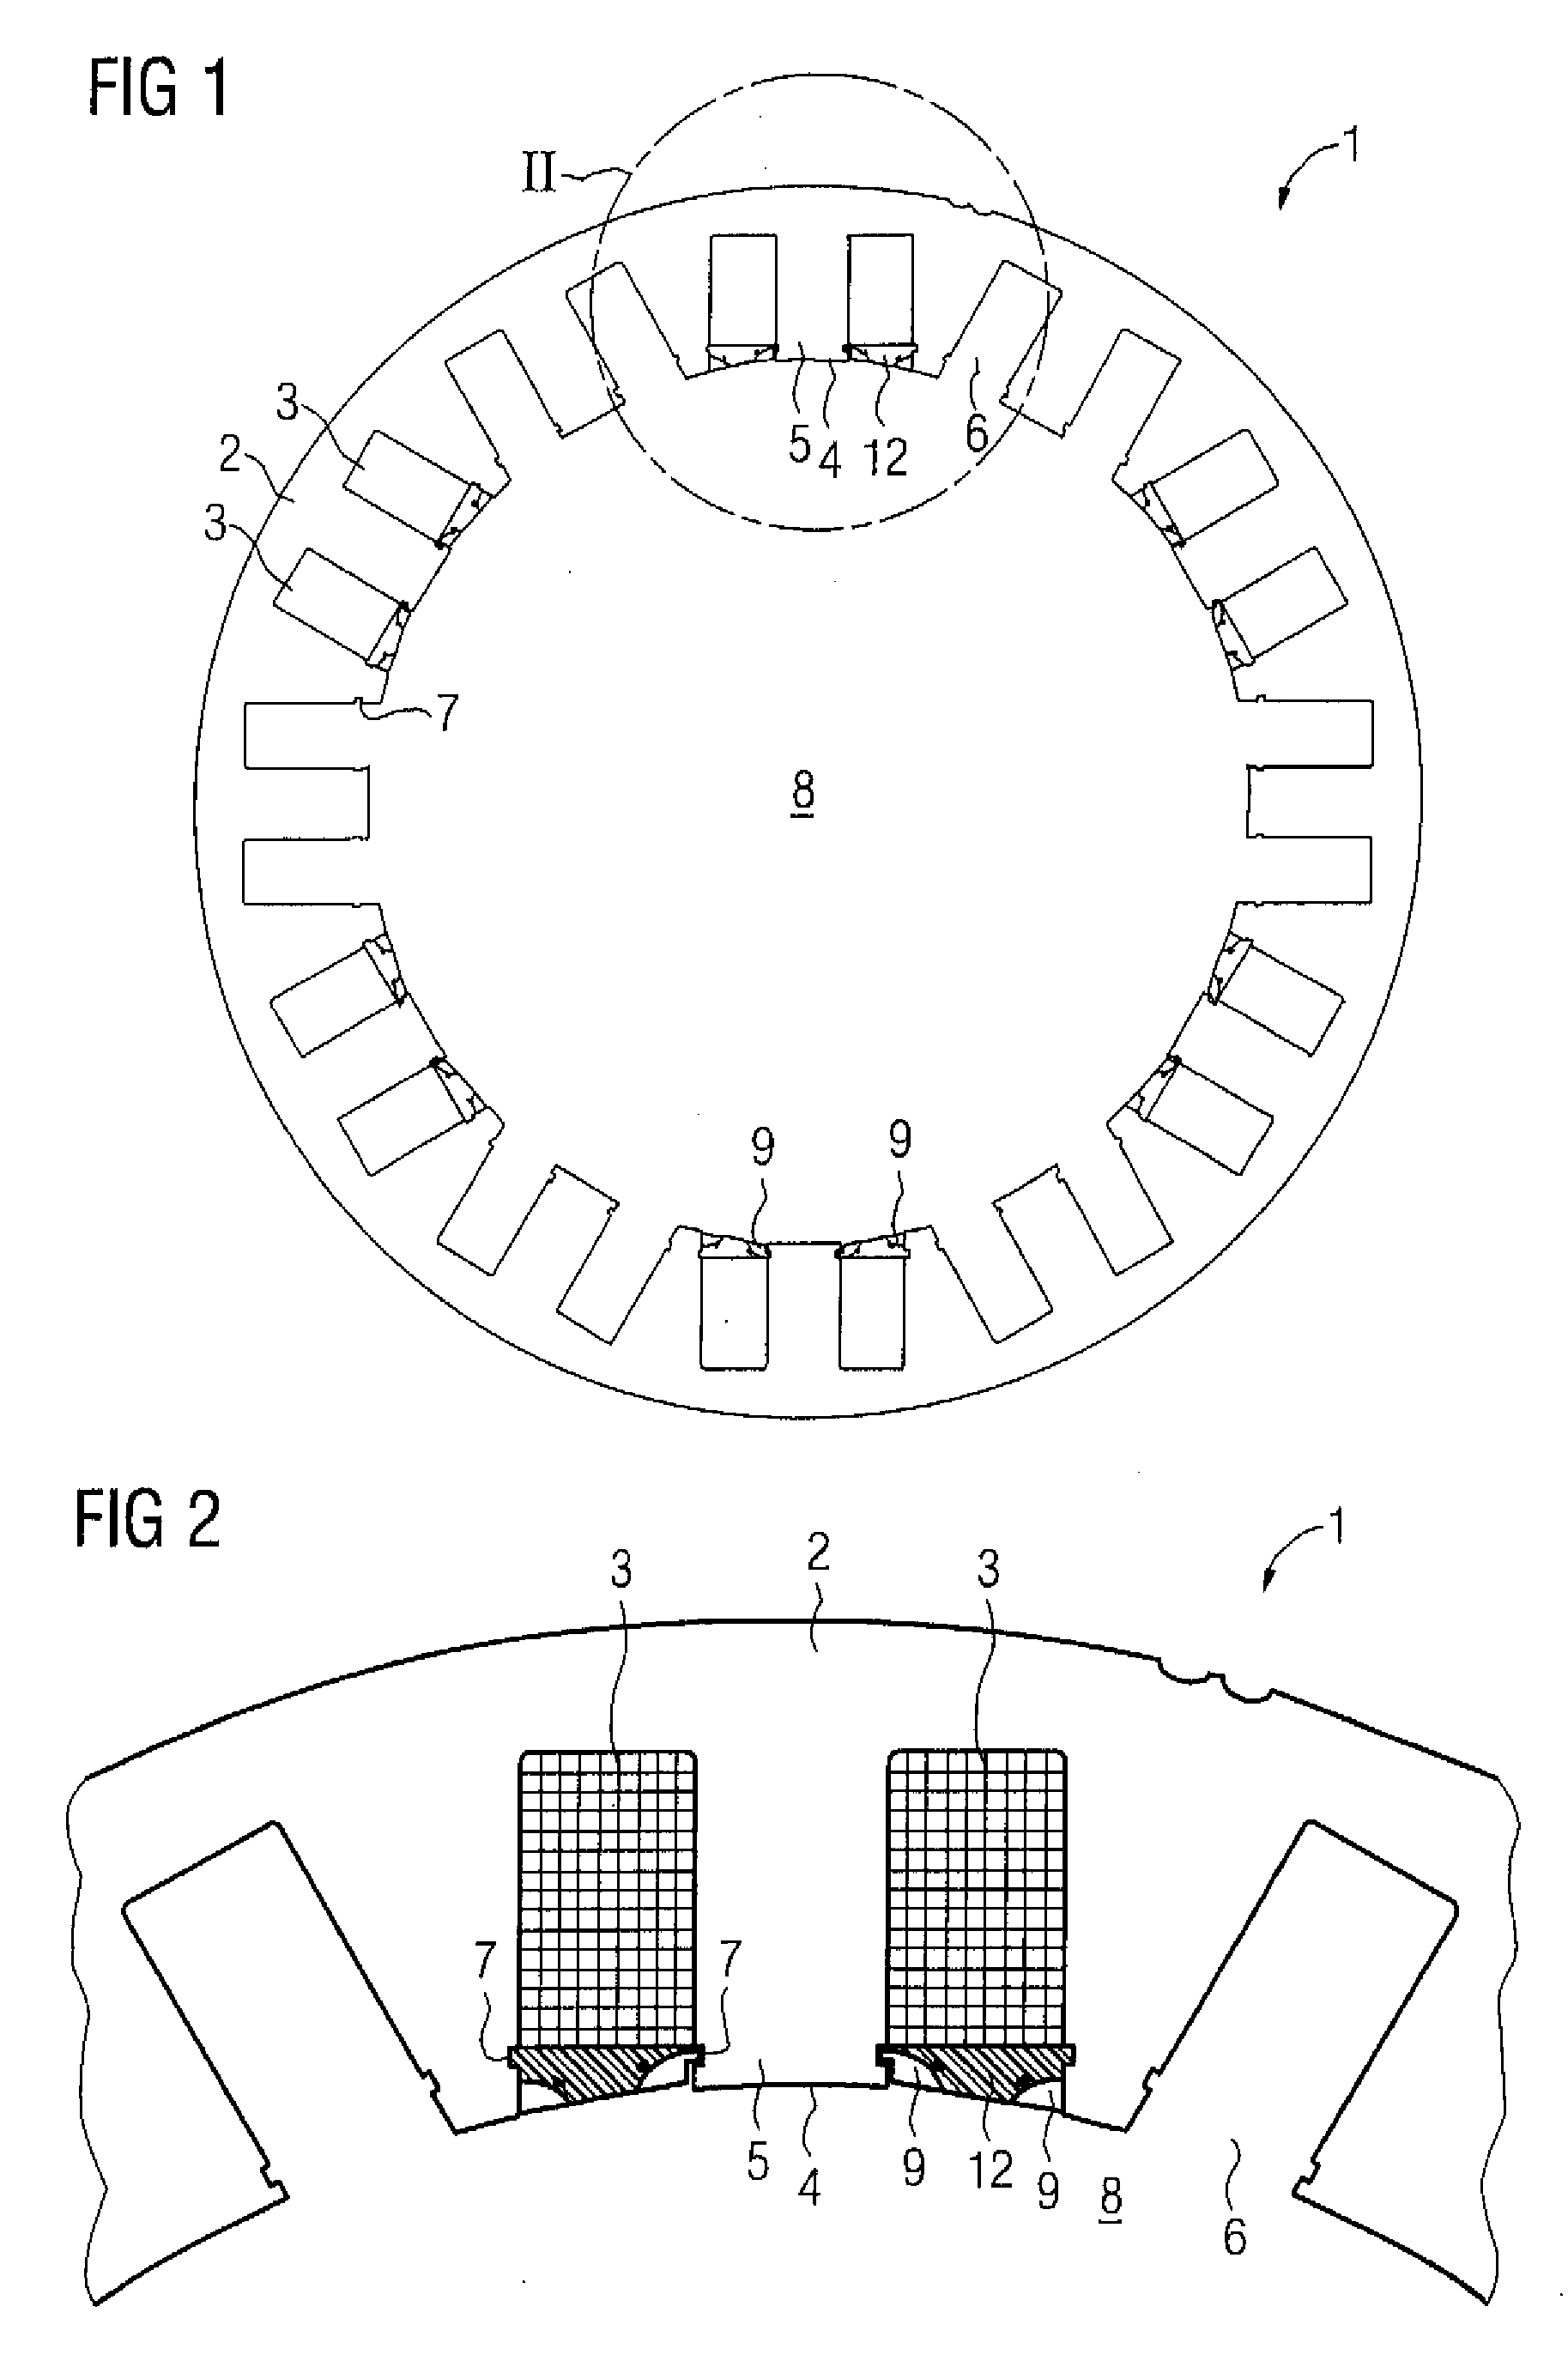 Dynamo-electrical machine with tooth-wound coils